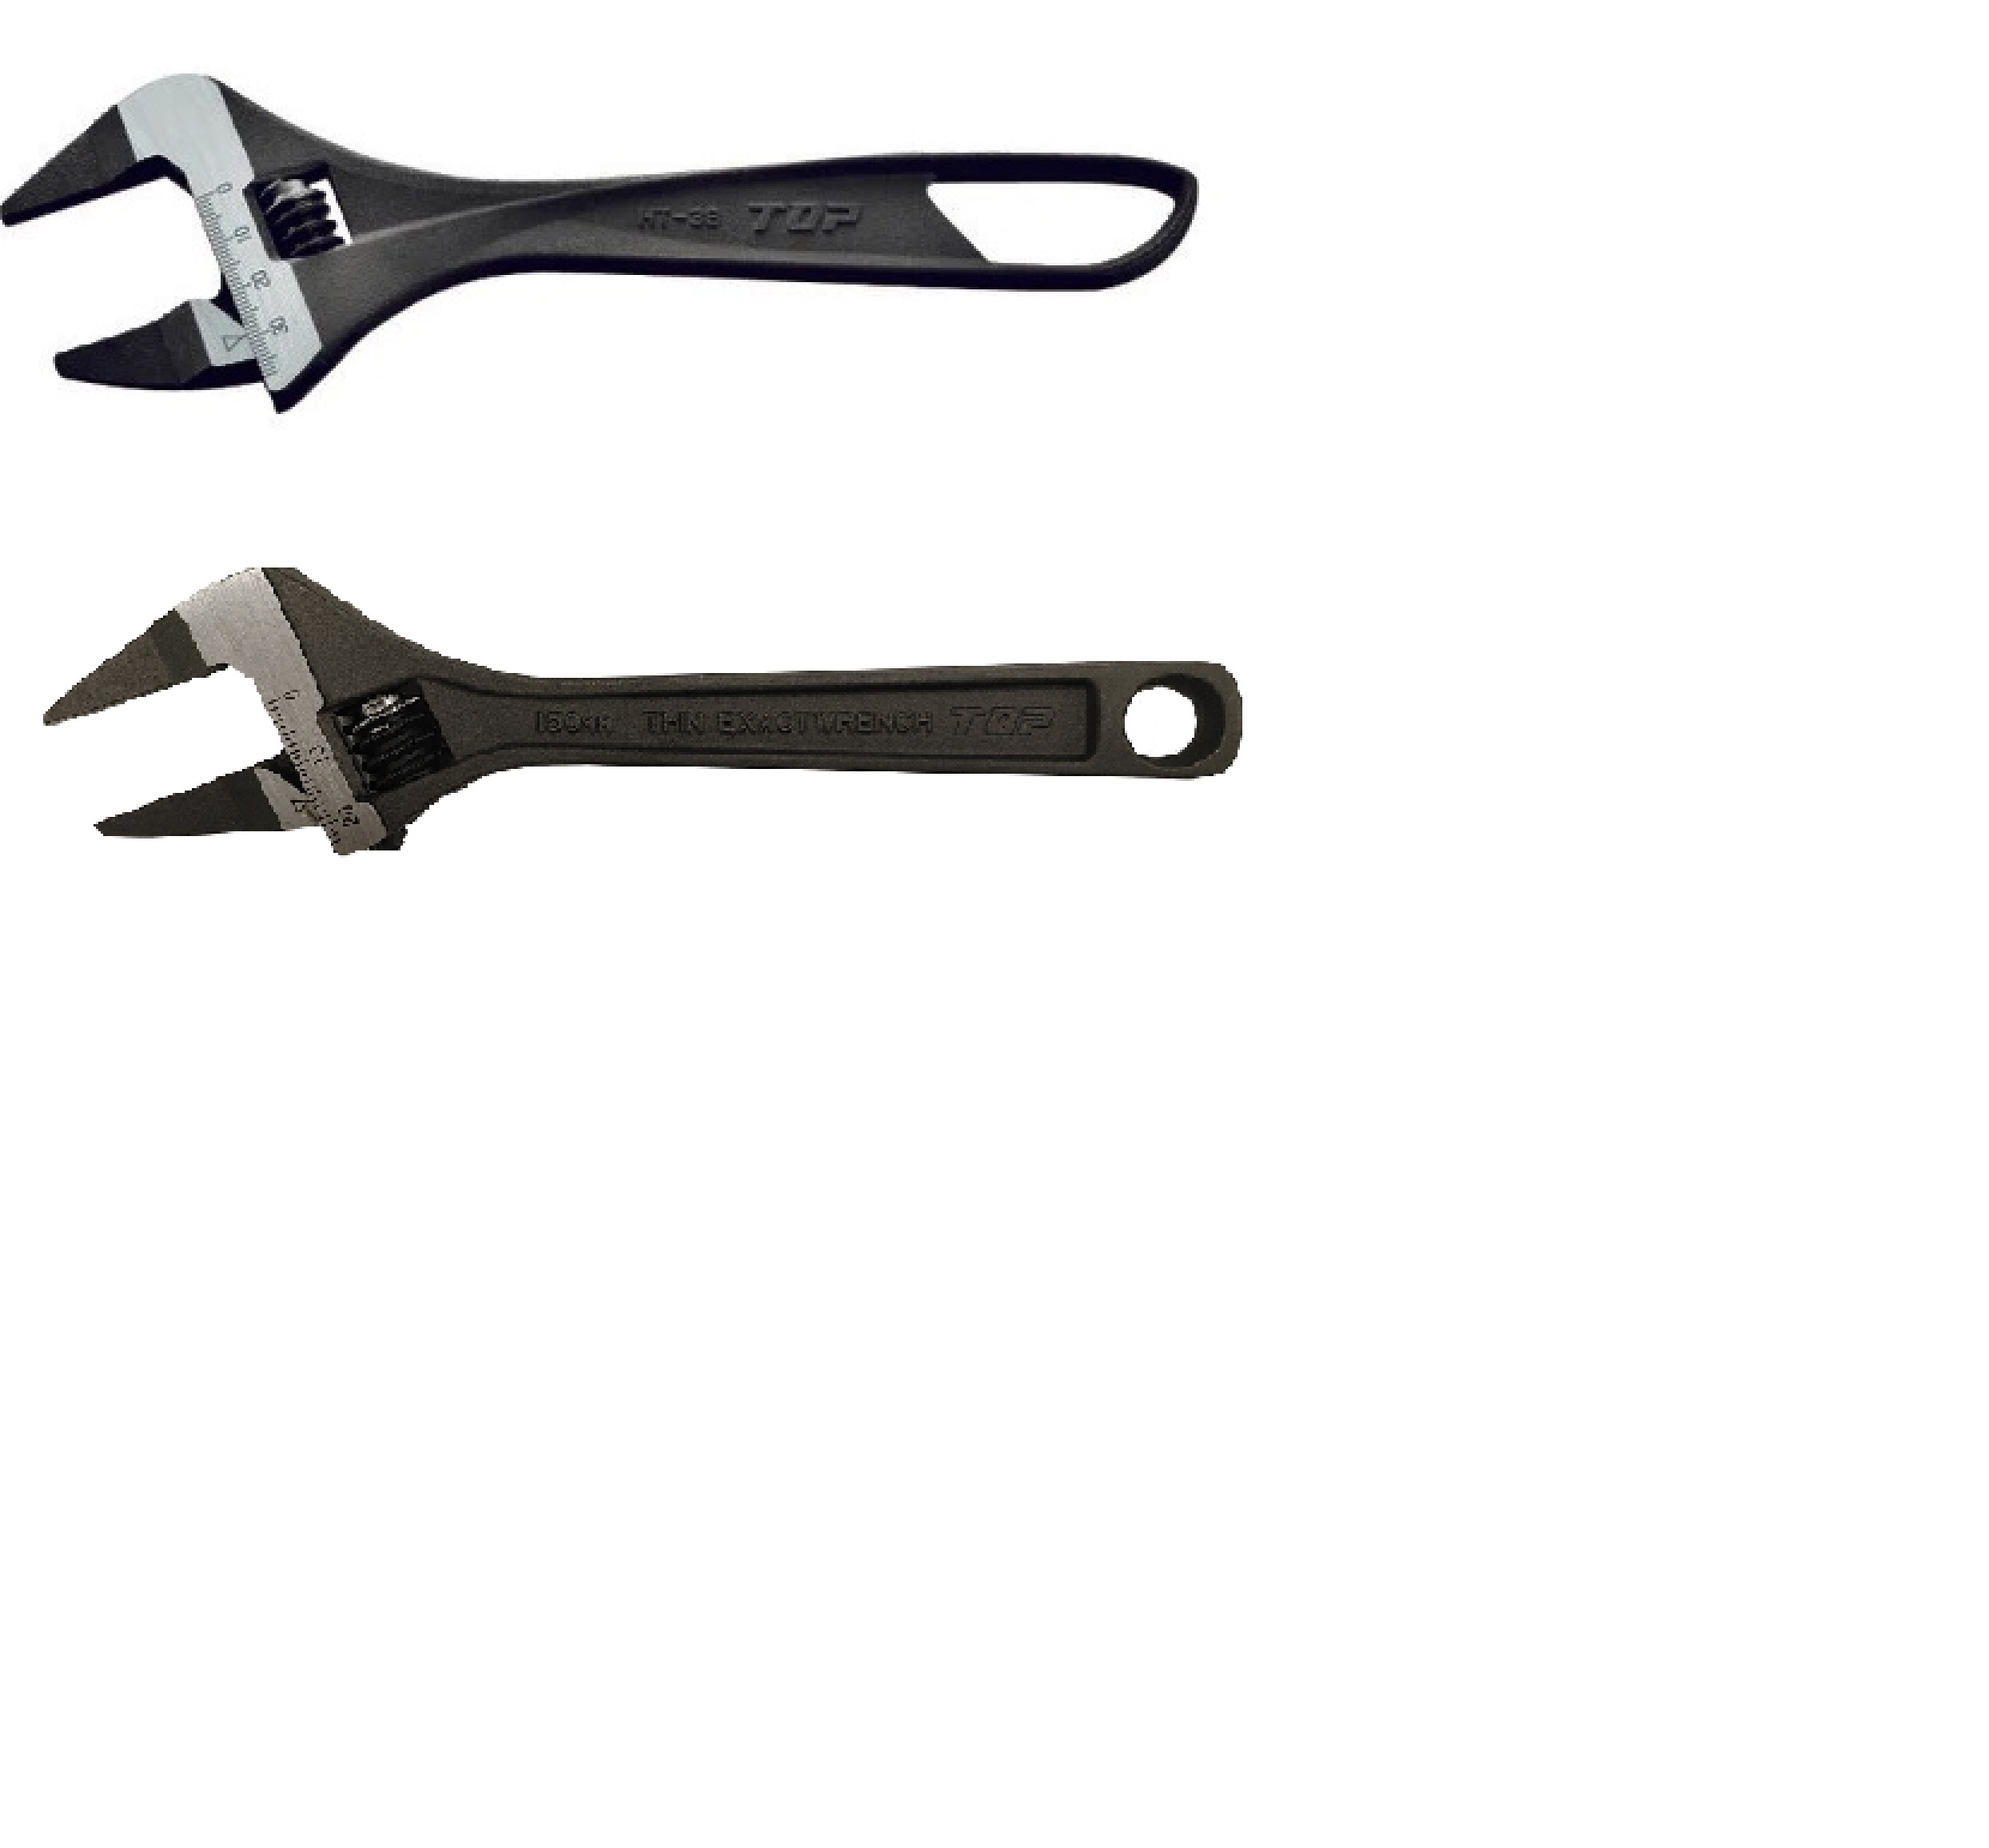 Exact Wrench Thin Jaw Adjustable Wrench